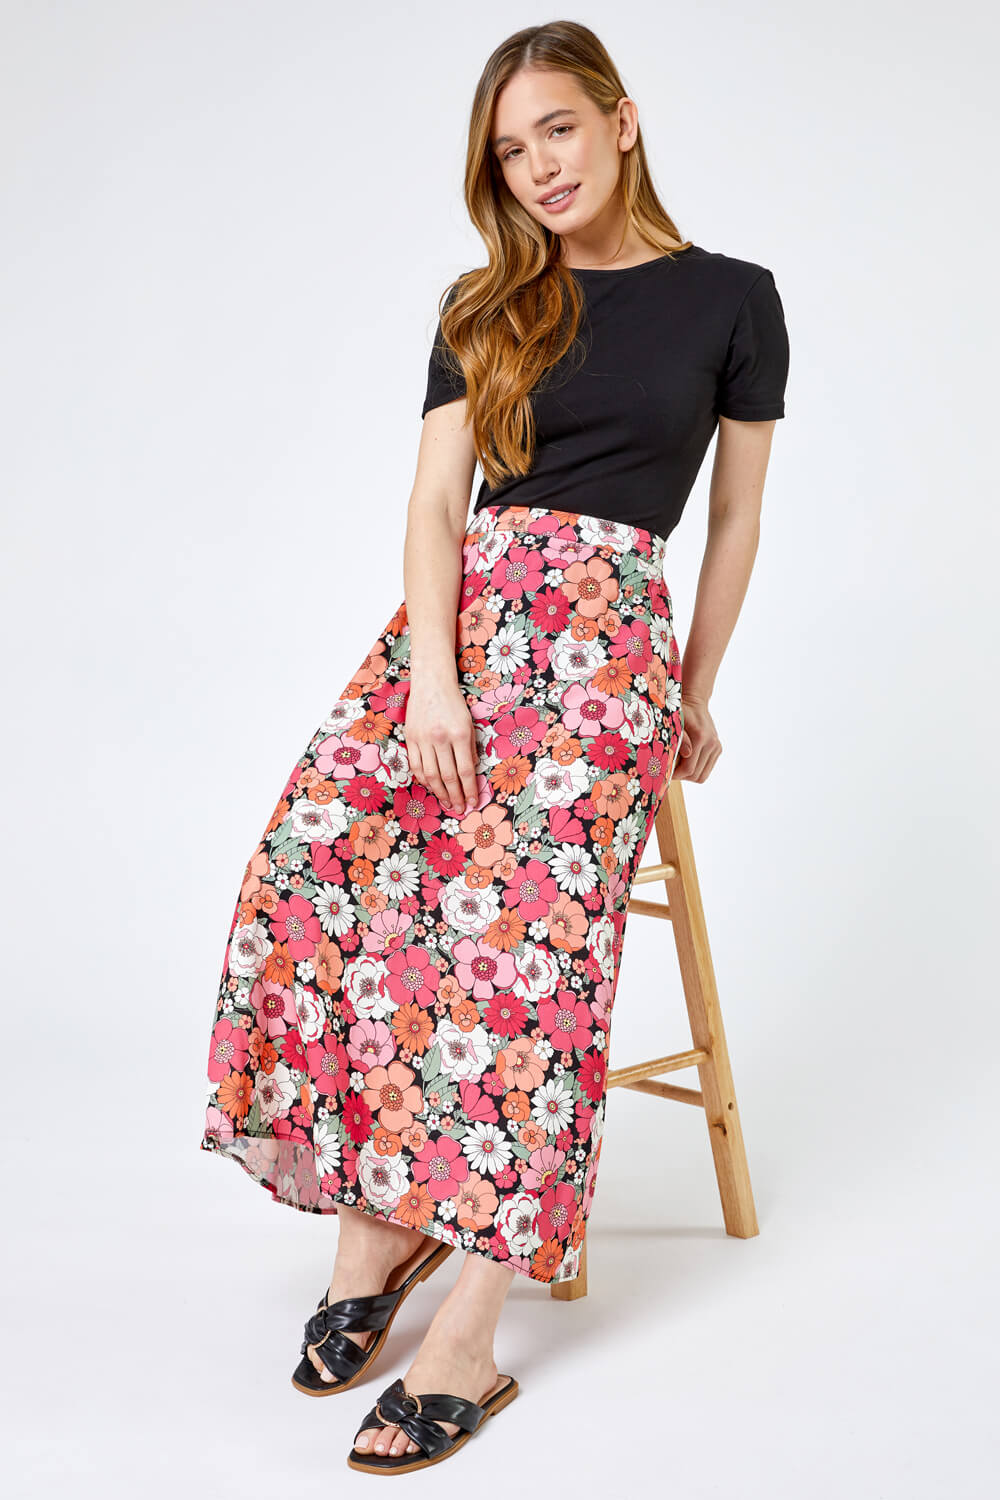 CORAL Petite Floral Print A-Line Skirt, Image 4 of 4